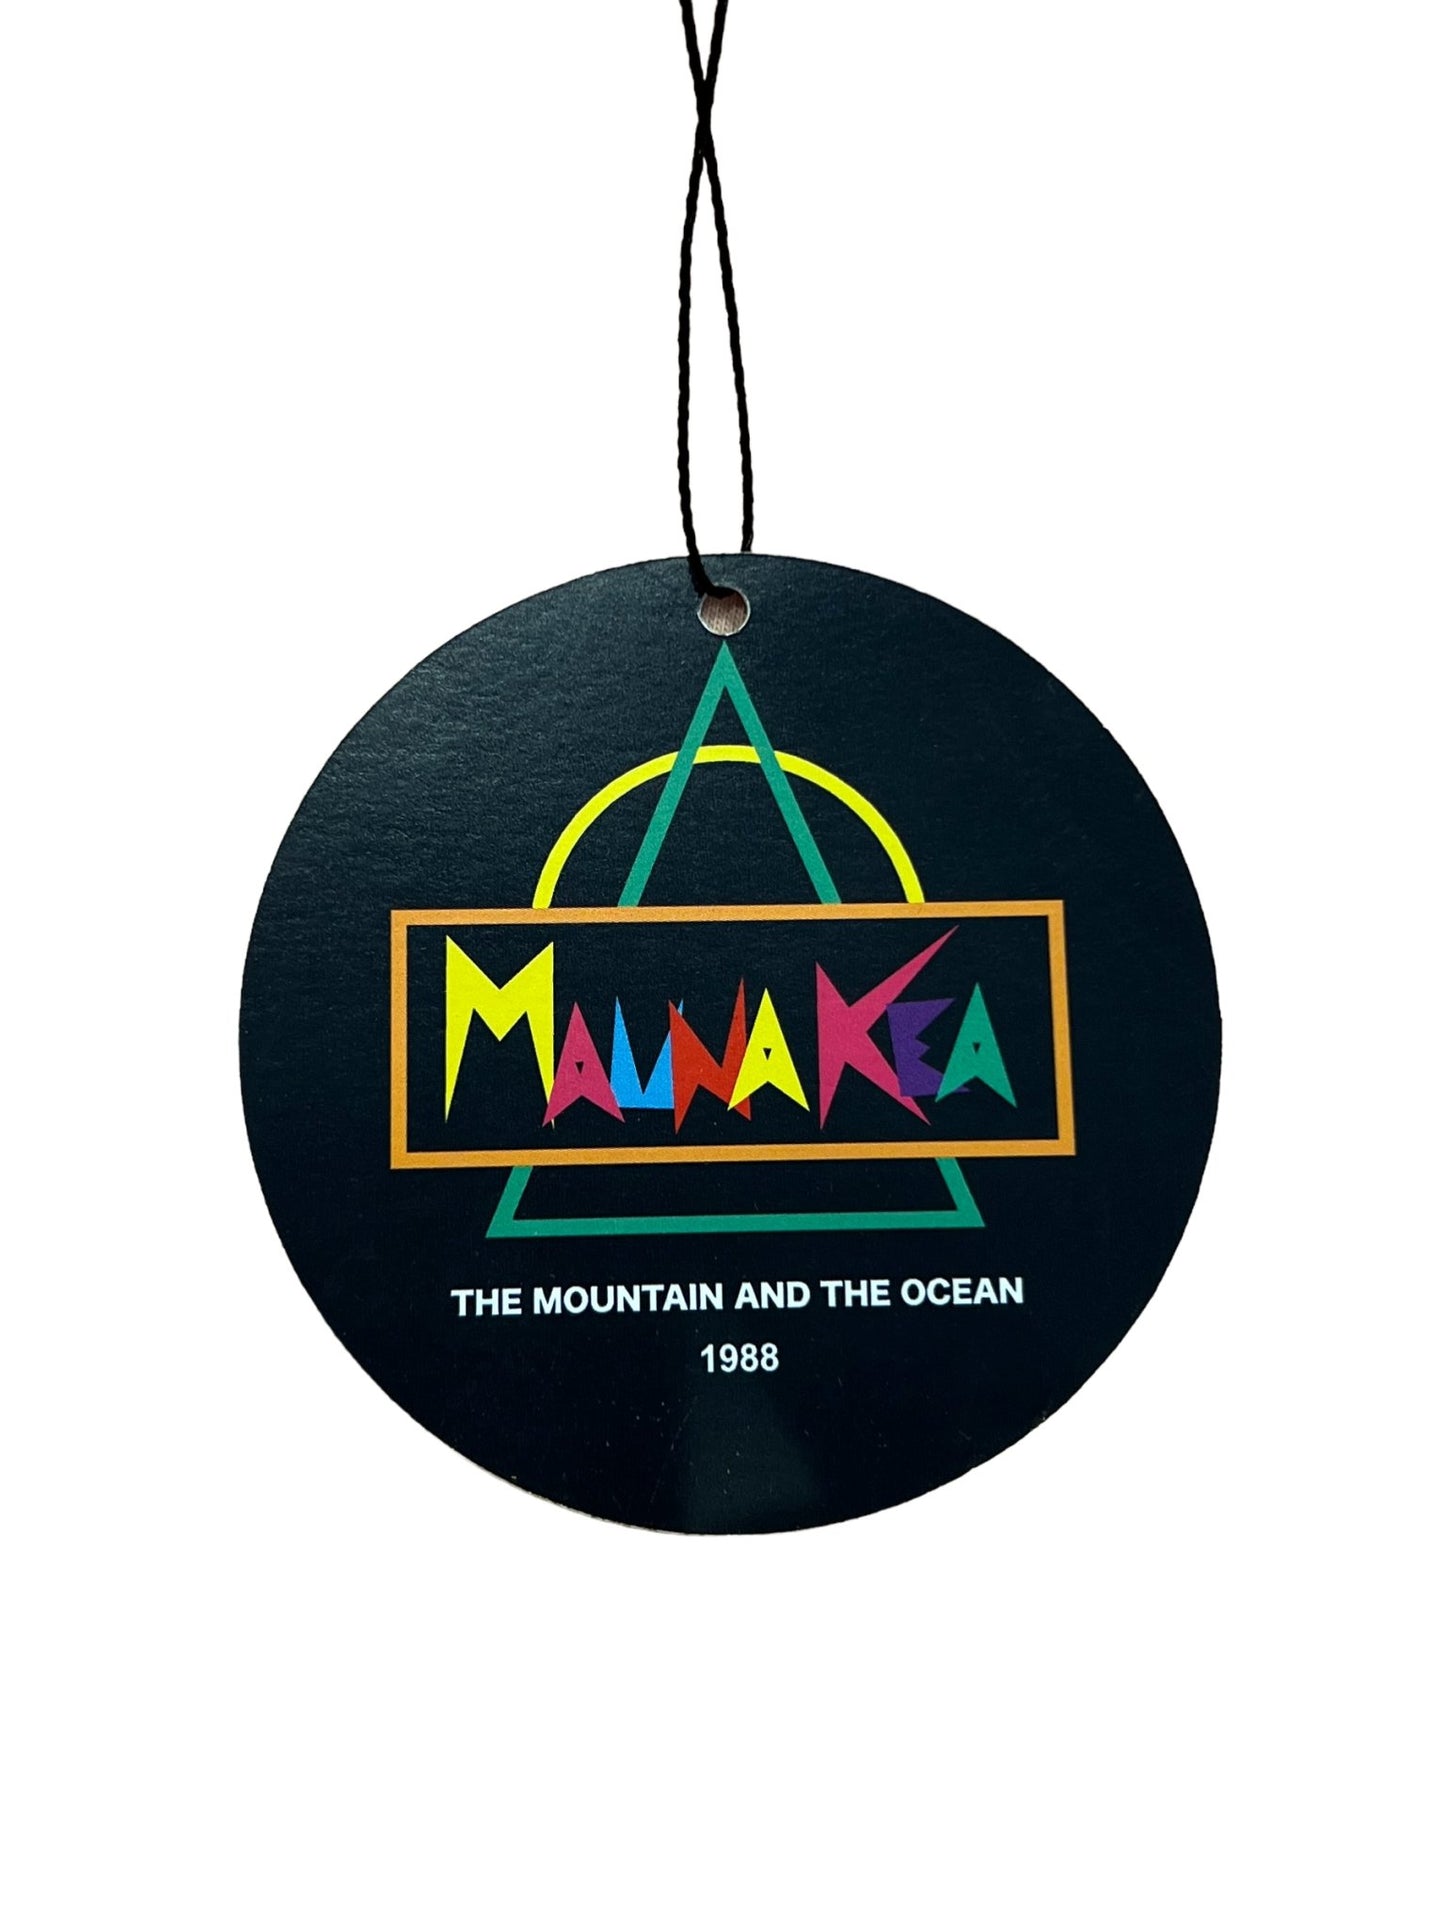 Round blue and black hanging MAUNA-KEA tag with the text "mauna kea, the mountain and the ocean, 1988" in colorful letters, and an abstract geometric design featuring a graphic roses print above.